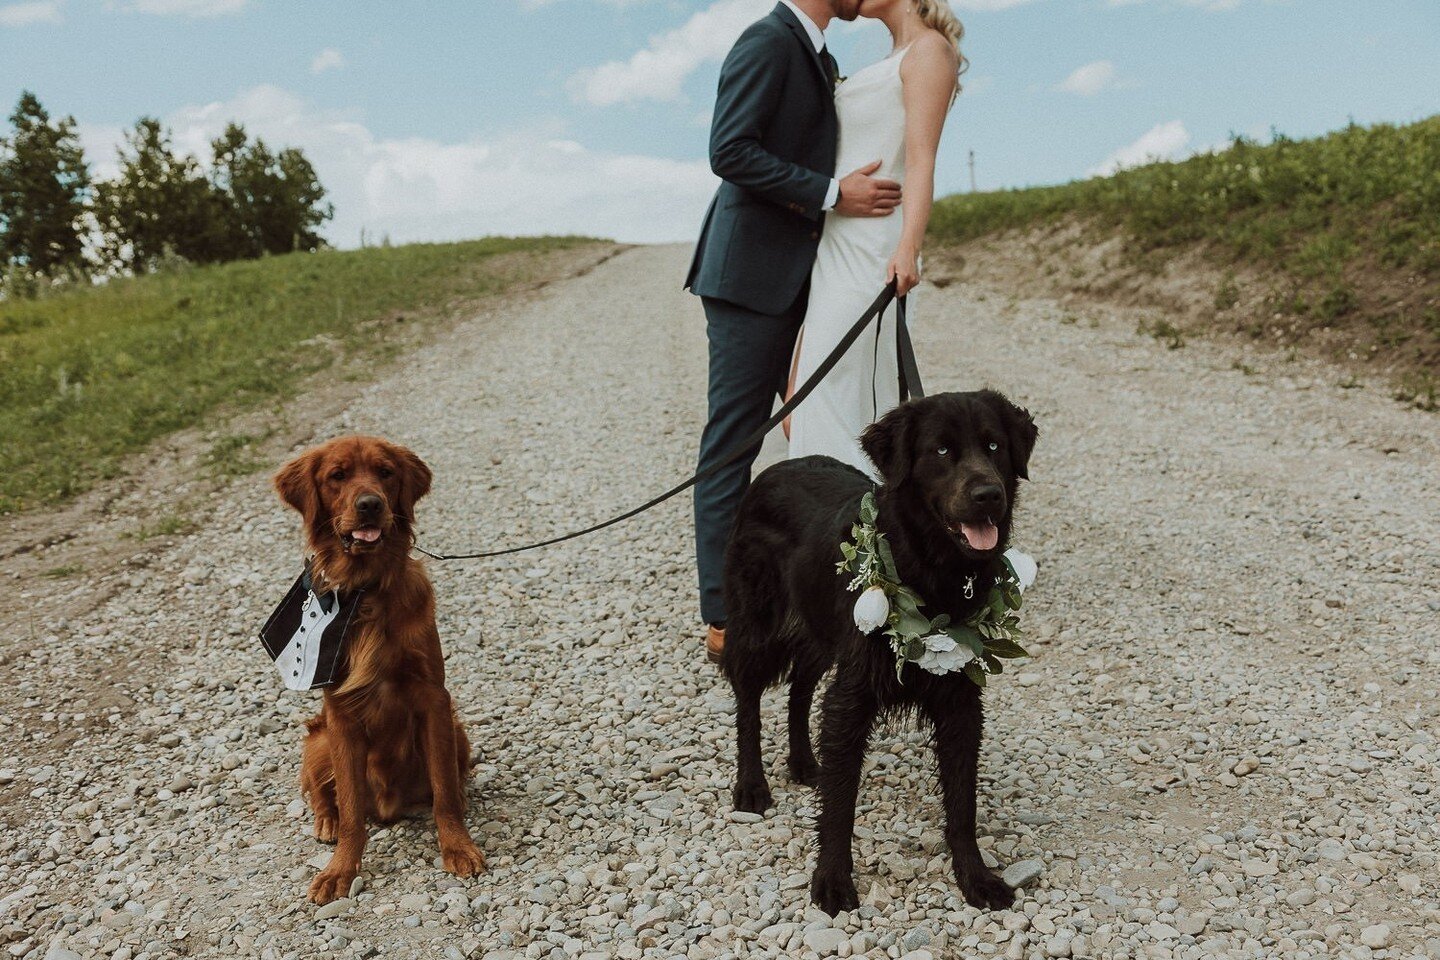 Pawsitively enchanting weddings where love knows no bounds! From wagging tails to furry family members, our venue celebrates the joy of saying &lsquo;I do&rsquo; with all your loved ones, including the ones with four legs. 🐾💕 #PetFriendlyLove #Wedd